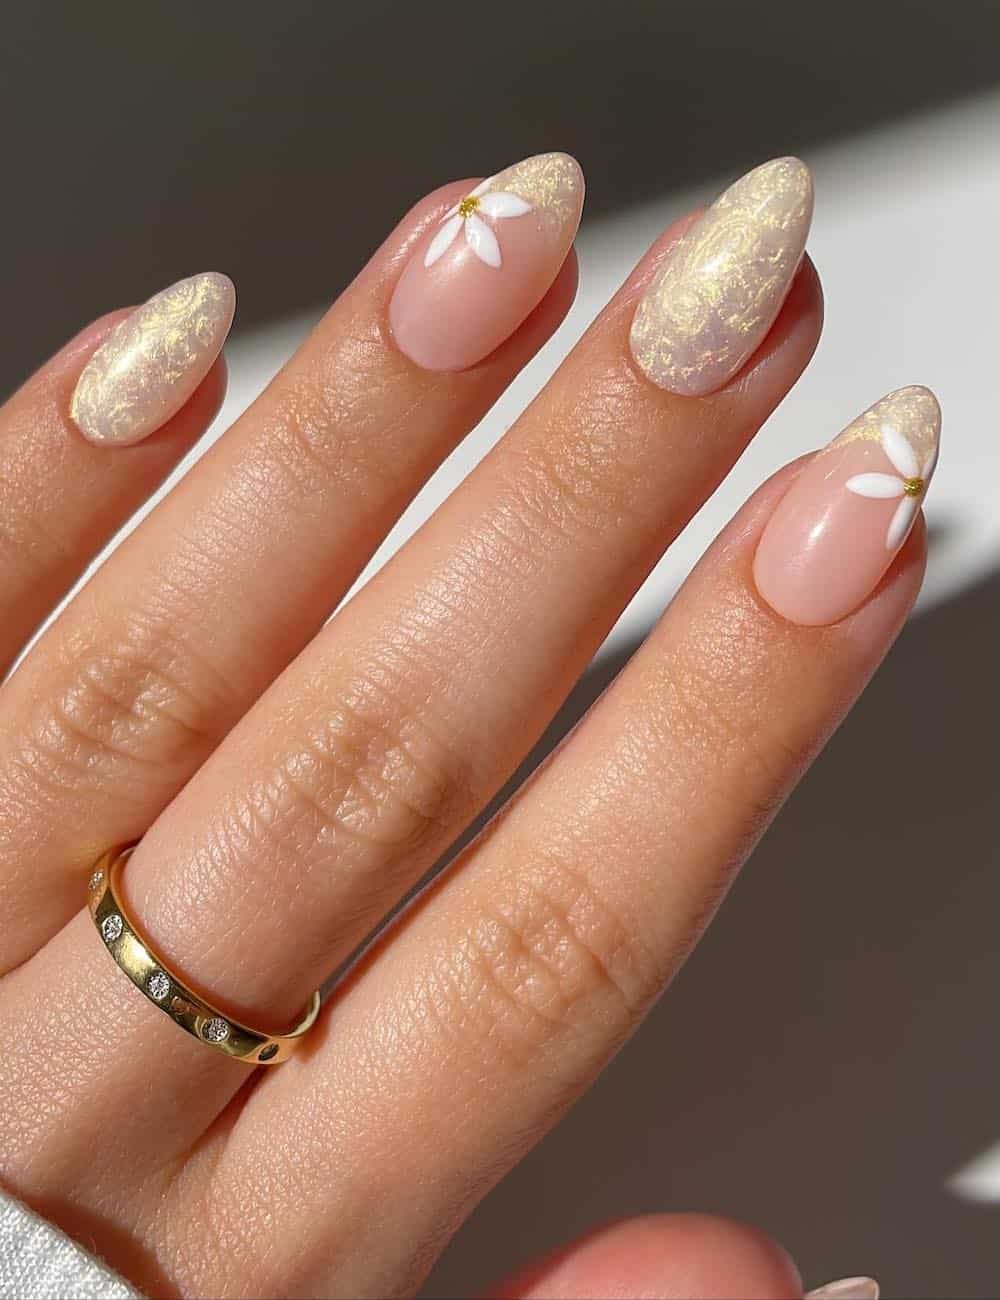 medium almond nails with a pearly yellow finish and french tip accent nails with floral art